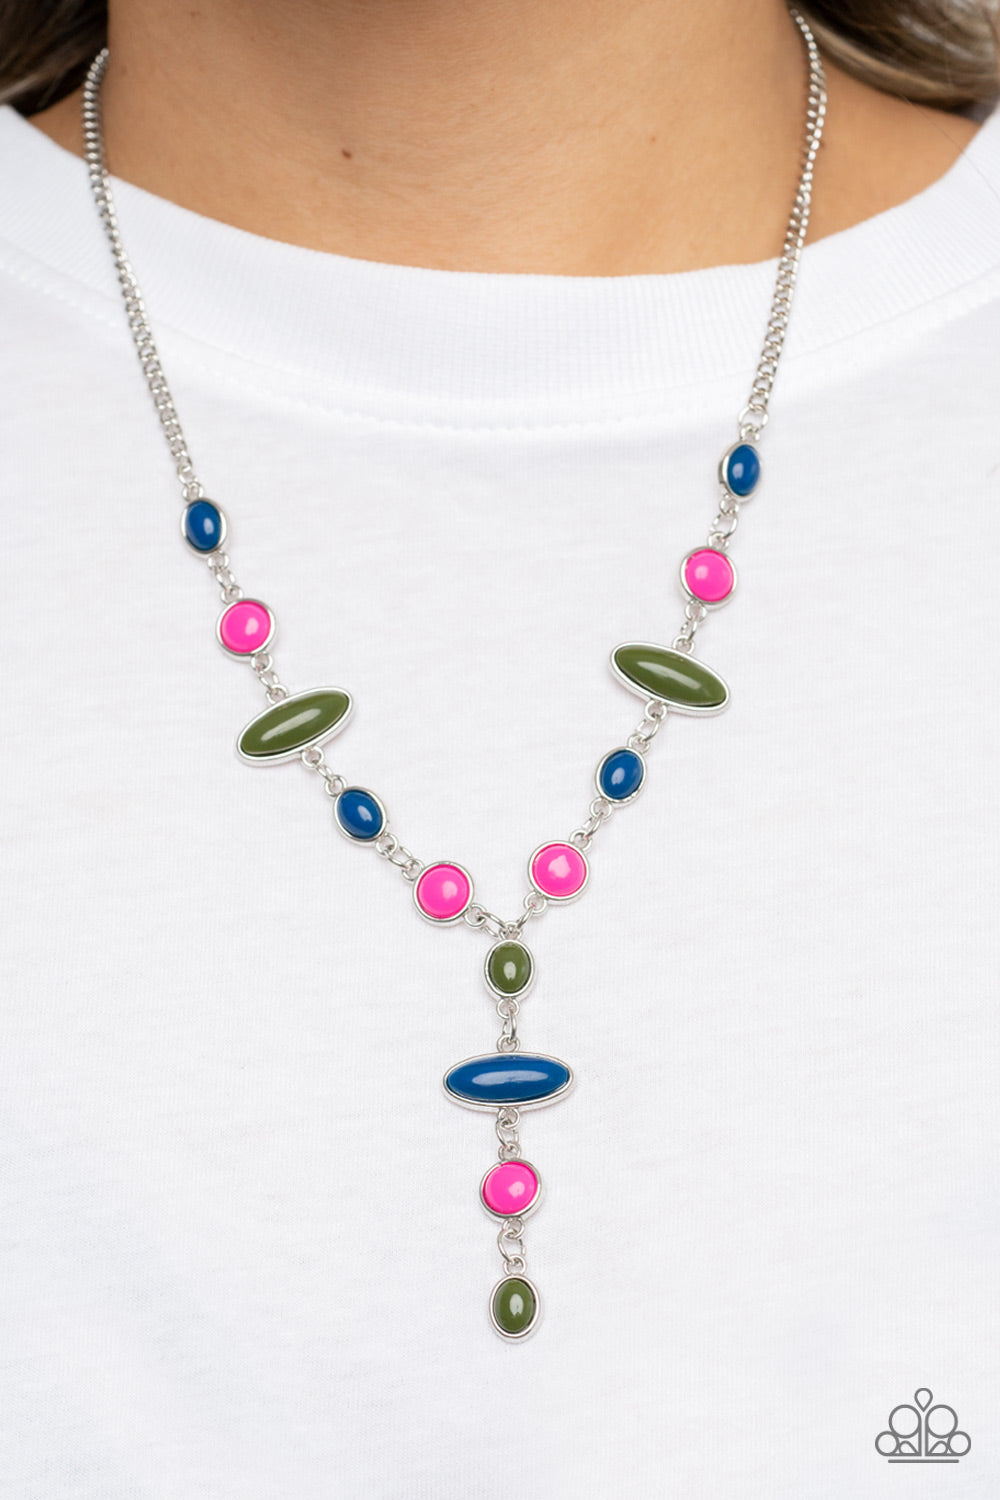 Paparazzi Accessories - Authentically Adventurous - Multi Necklaces encased in sleek silver frames, bubbly Mykonos Blue, Olive Branch, and Fuchsia Fedora oval and round beads link into a colorful display, resulting in a playful extended pendant below the collar. Features an adjustable clasp closure.  Sold as one individual necklace. Includes one pair of matching earrings.